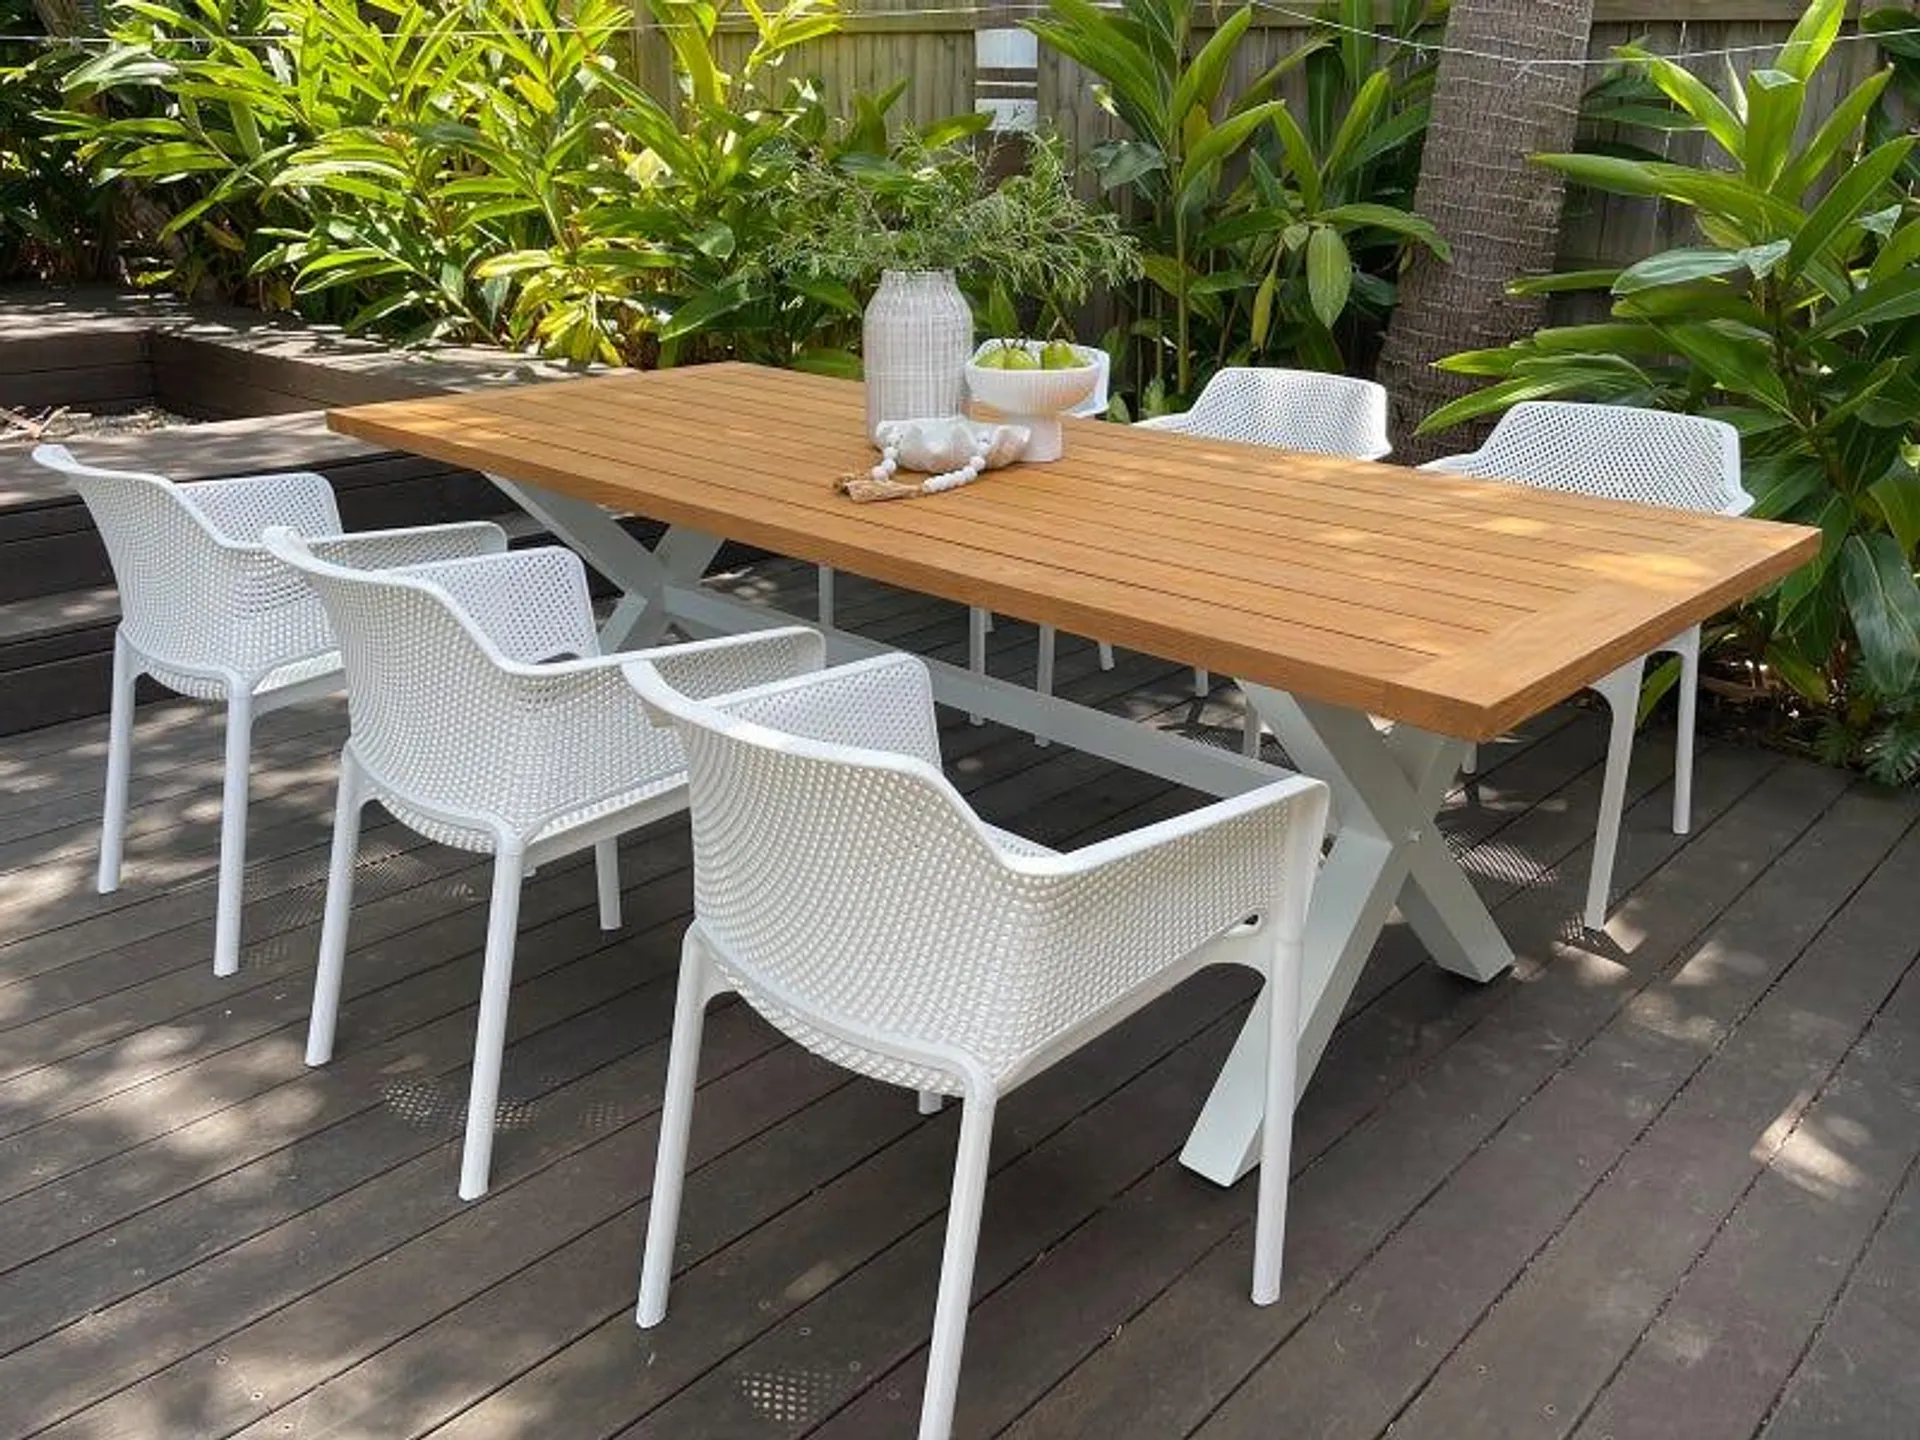 Lyon Table with Bailey Chairs 7pc Outdoor Dining Setting